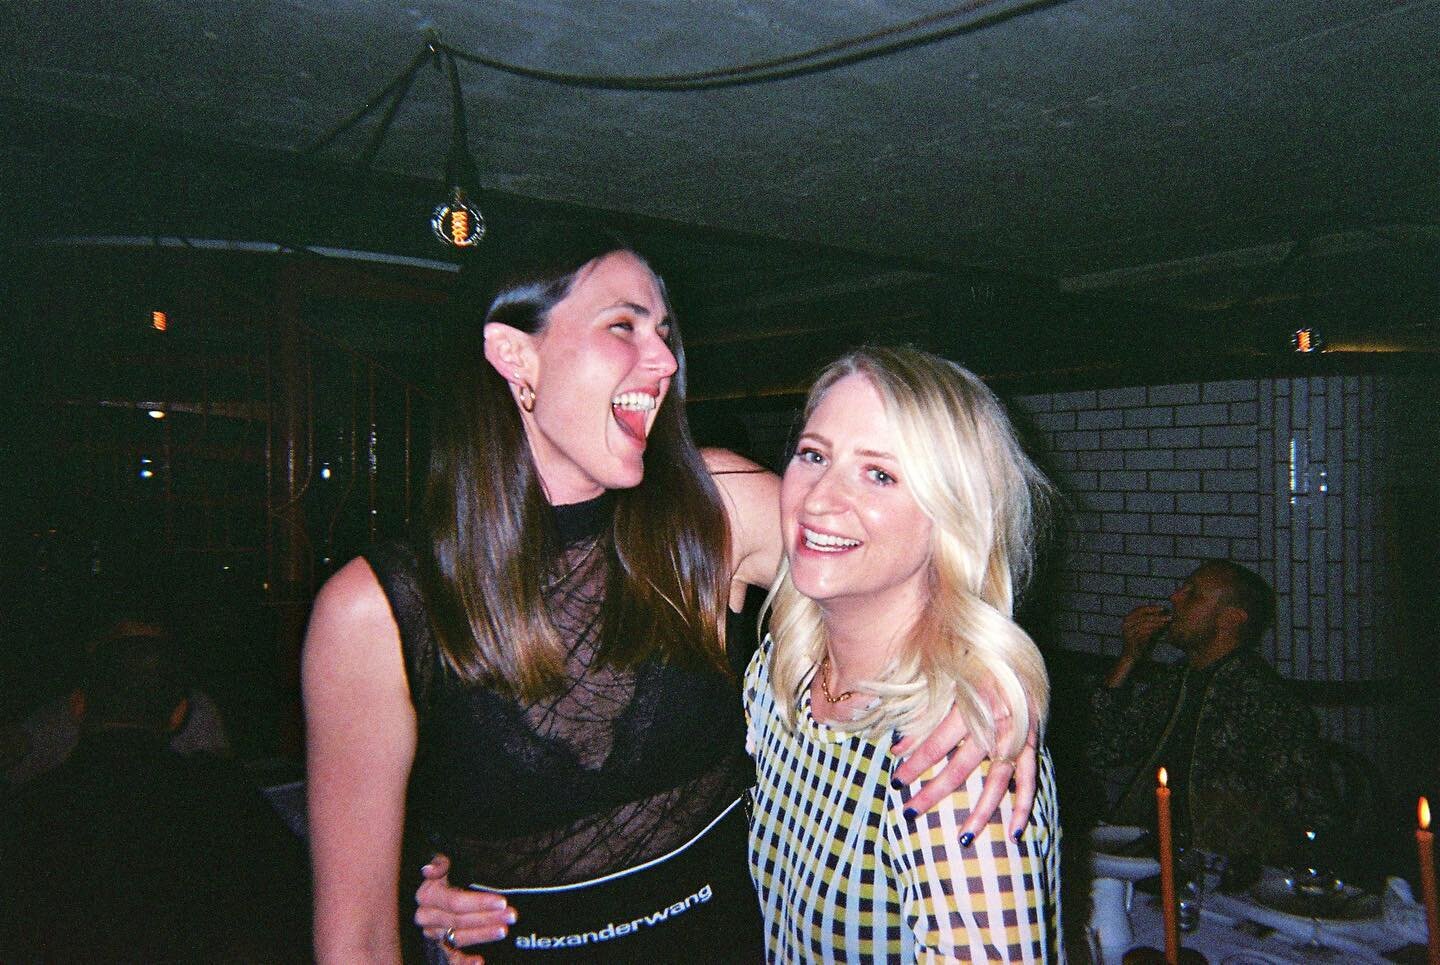 It&rsquo;s Kate Day!!!!!! Happy birthday my beautiful friend. I&rsquo;ll always be here to celebrate YOU on this day &hearts;️🎂&hearts;️🎂&hearts;️🎂&hearts;️
If anyone needs us, we&rsquo;ll be out dancing together tonight 💃 
#happybirthday #HBD #f